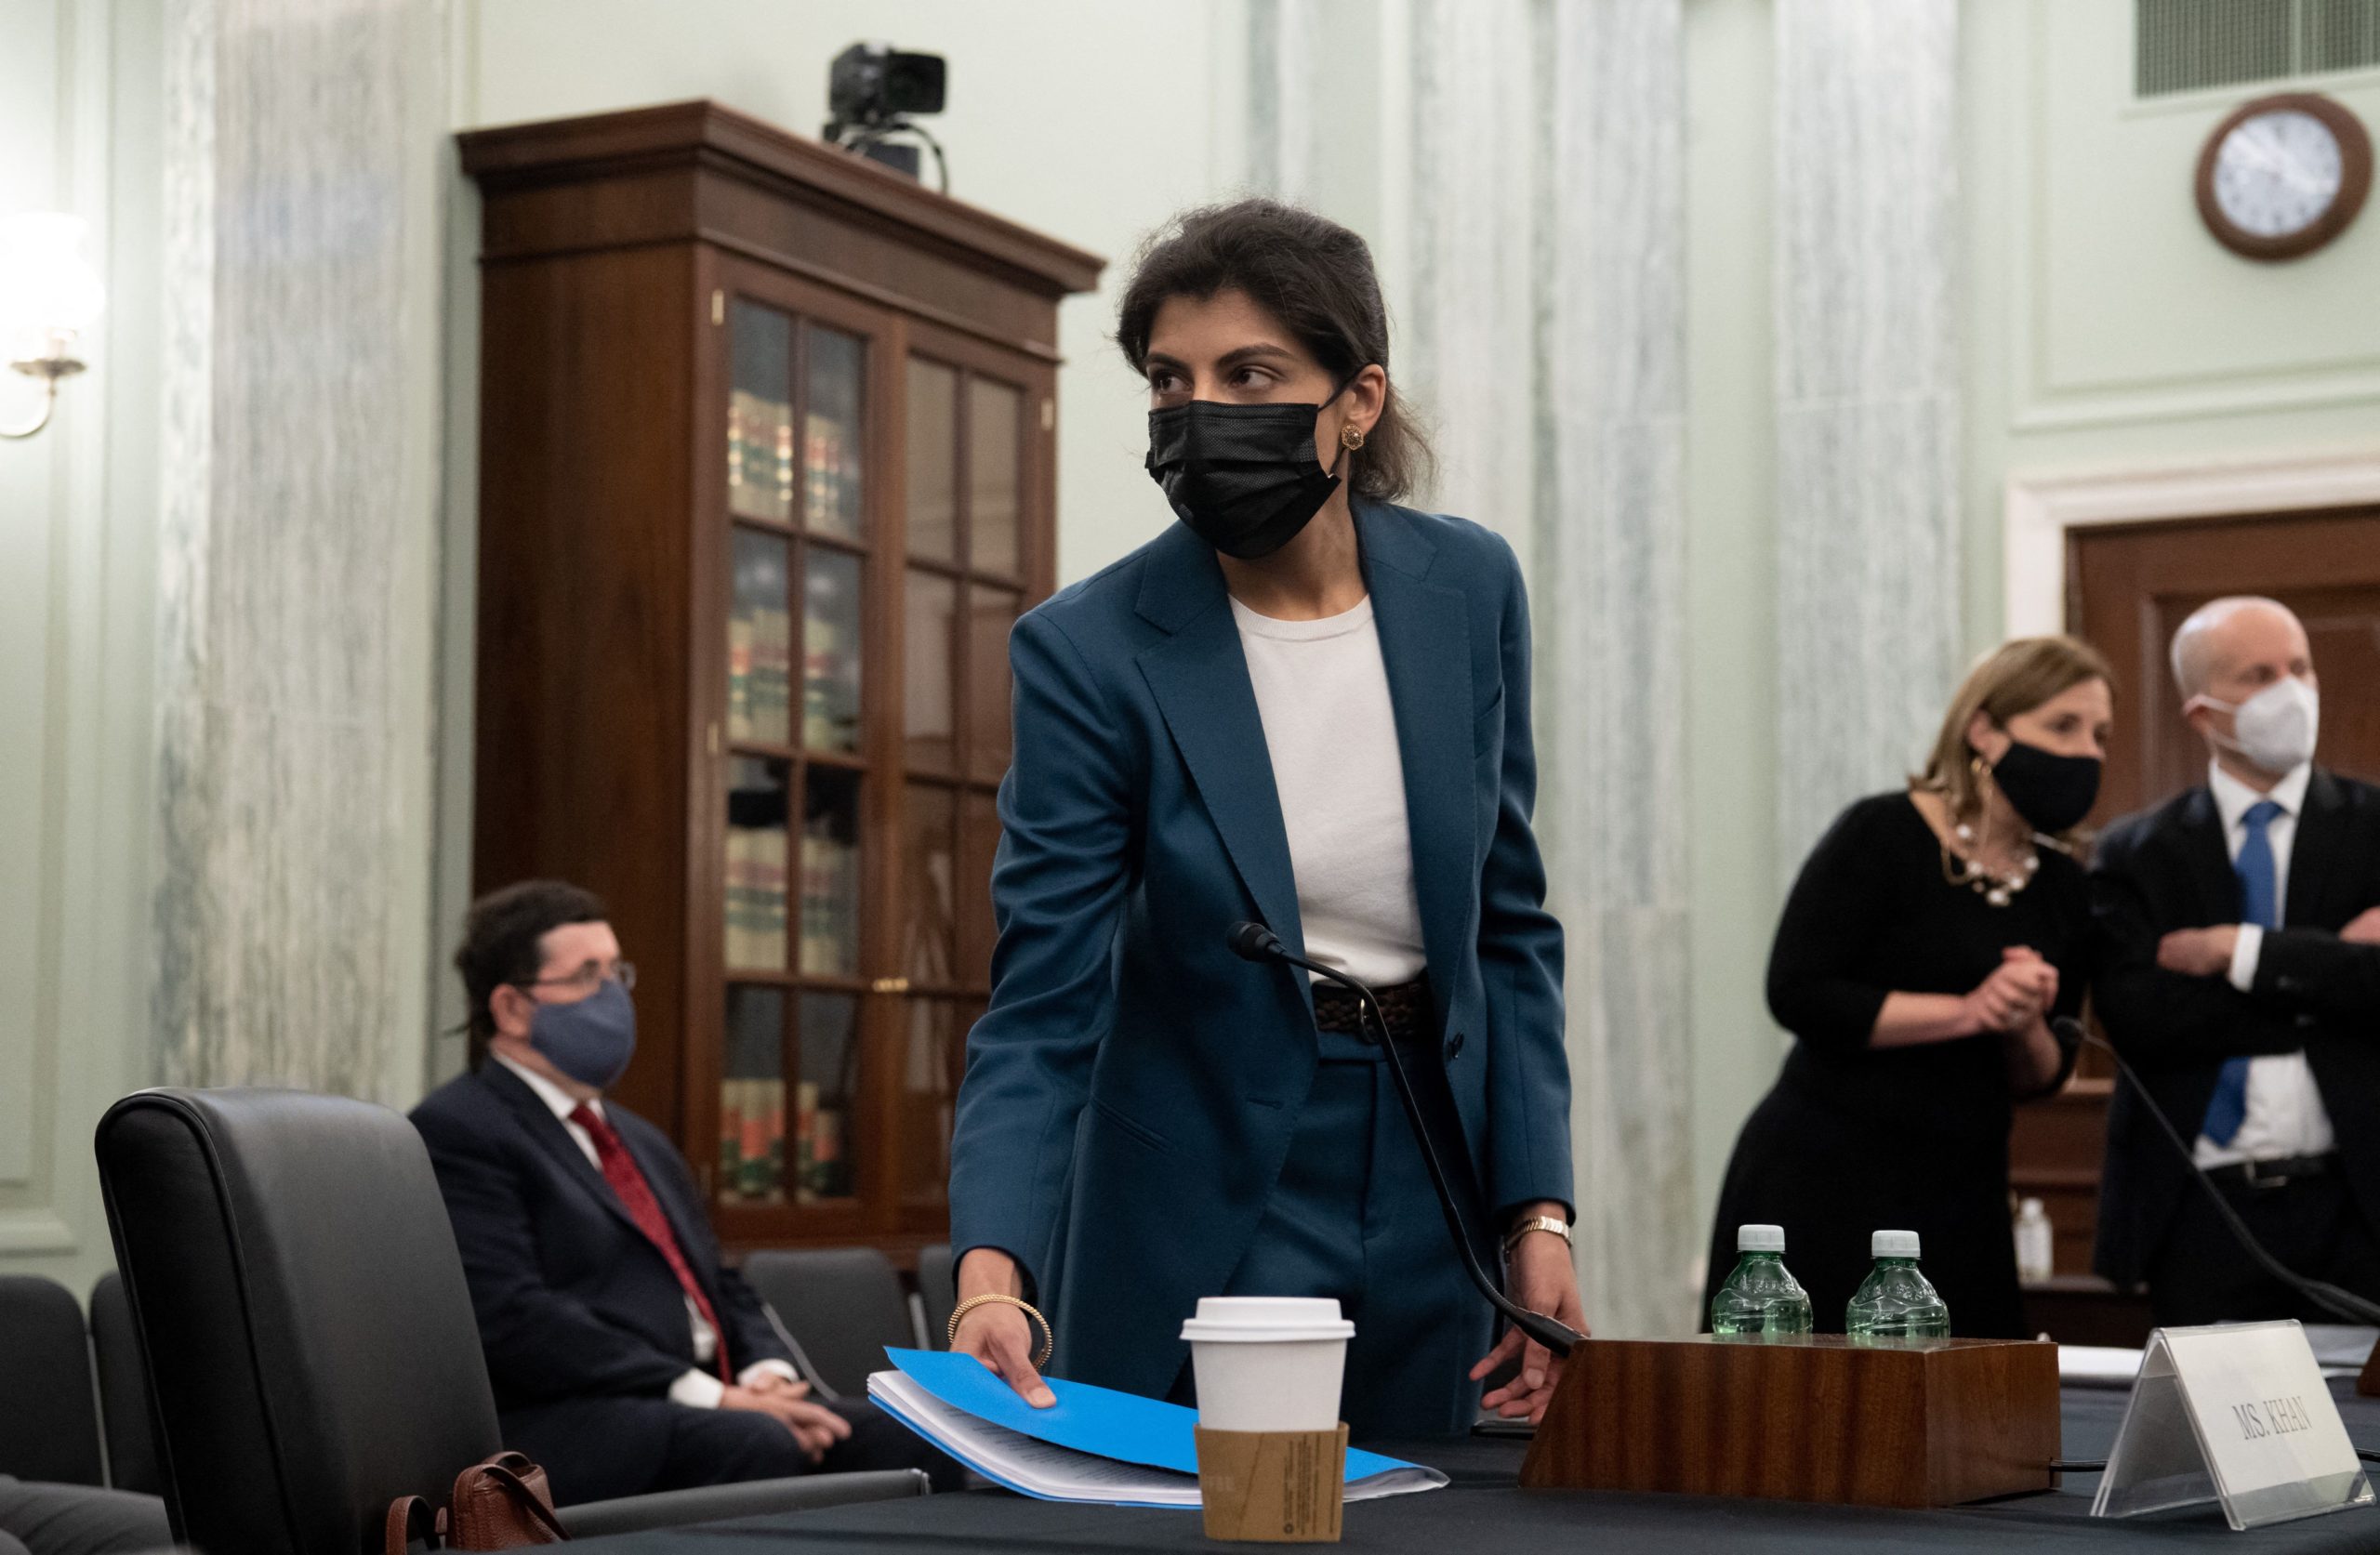 Lina Khan, then a nominee for Commissioner of the Federal Trade Commission (FTC), arrives to testify during a Senate Committee on Commerce, Science, and Transportation confirmation hearing on Capitol Hill in Washington, DC, April 21, 2021. (Photo by SAUL LOEB/POOL/AFP via Getty Images)